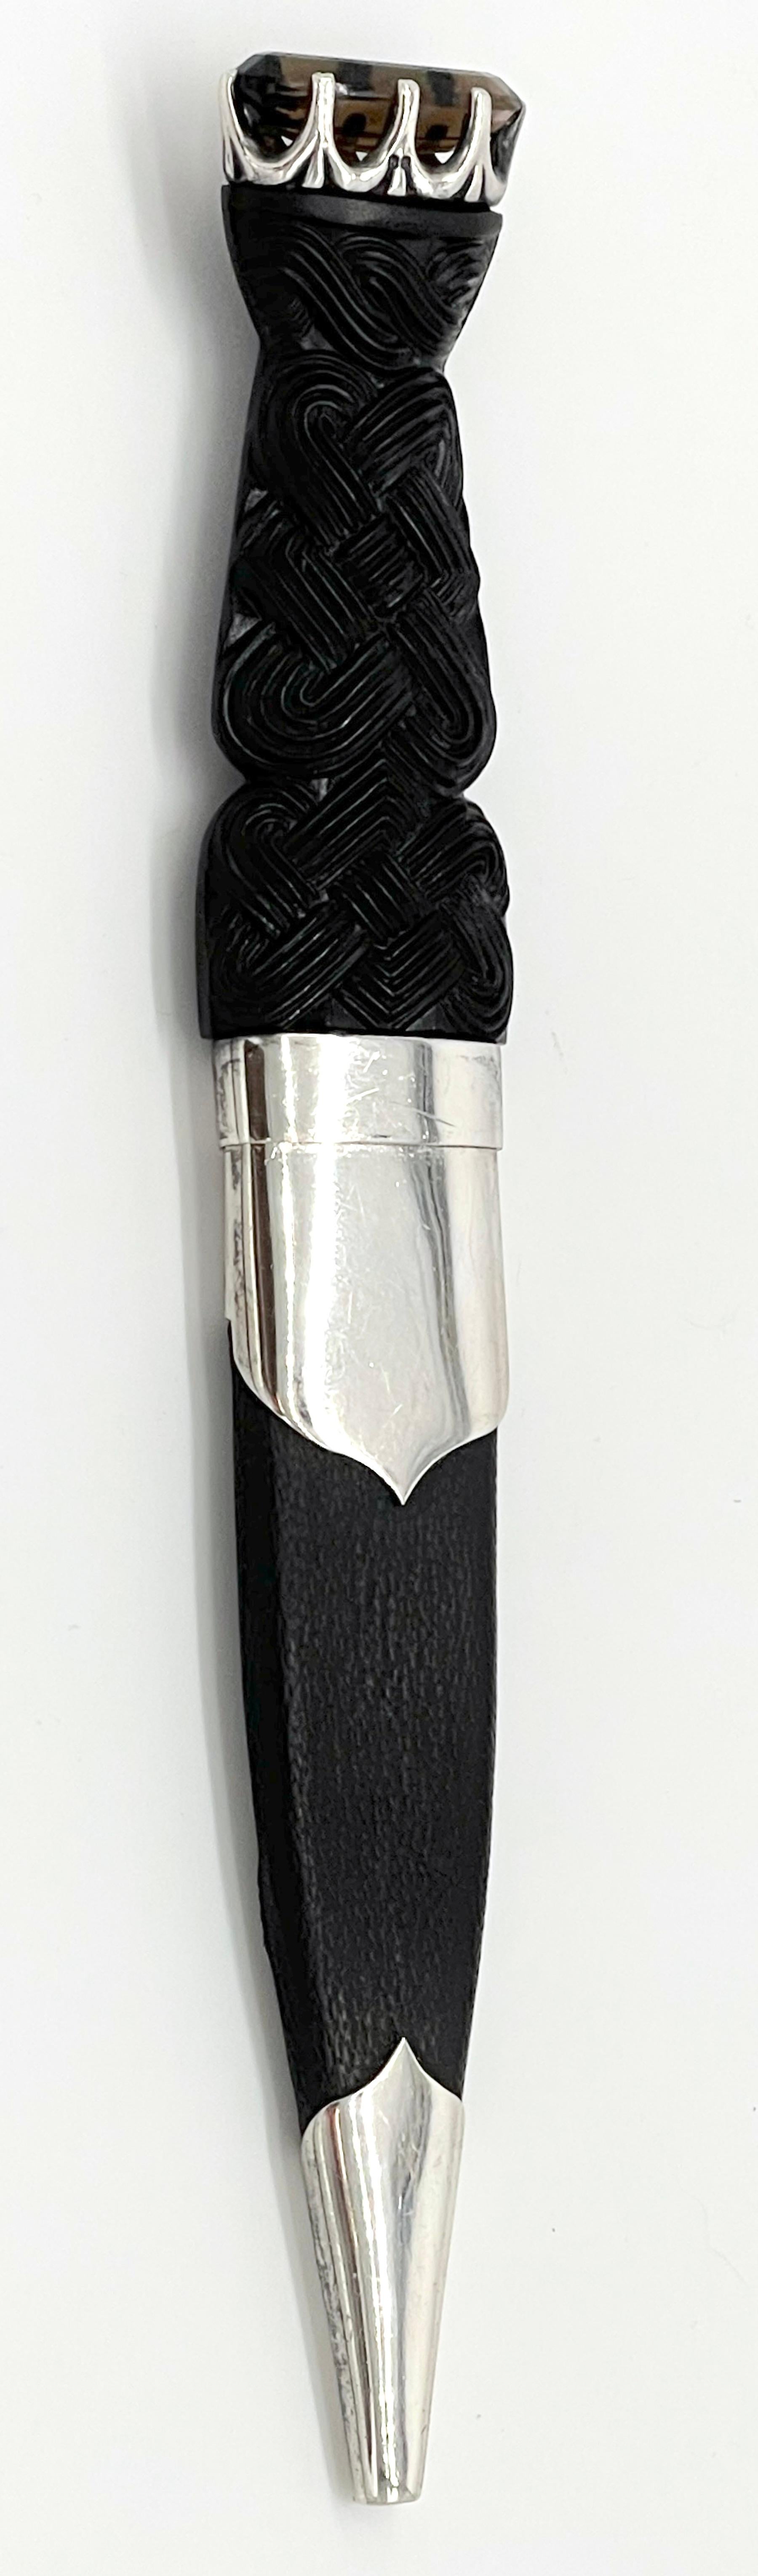 20th Century Scottish Sterling & Carved Celtic Knot Bog Wood Dirk (Sgain Dubh) with Topaz, a stunning representation of traditional Scottish craftsmanship and design.

The dirk features an oval Topaz gemstone elegantly fitted at the top, adding a